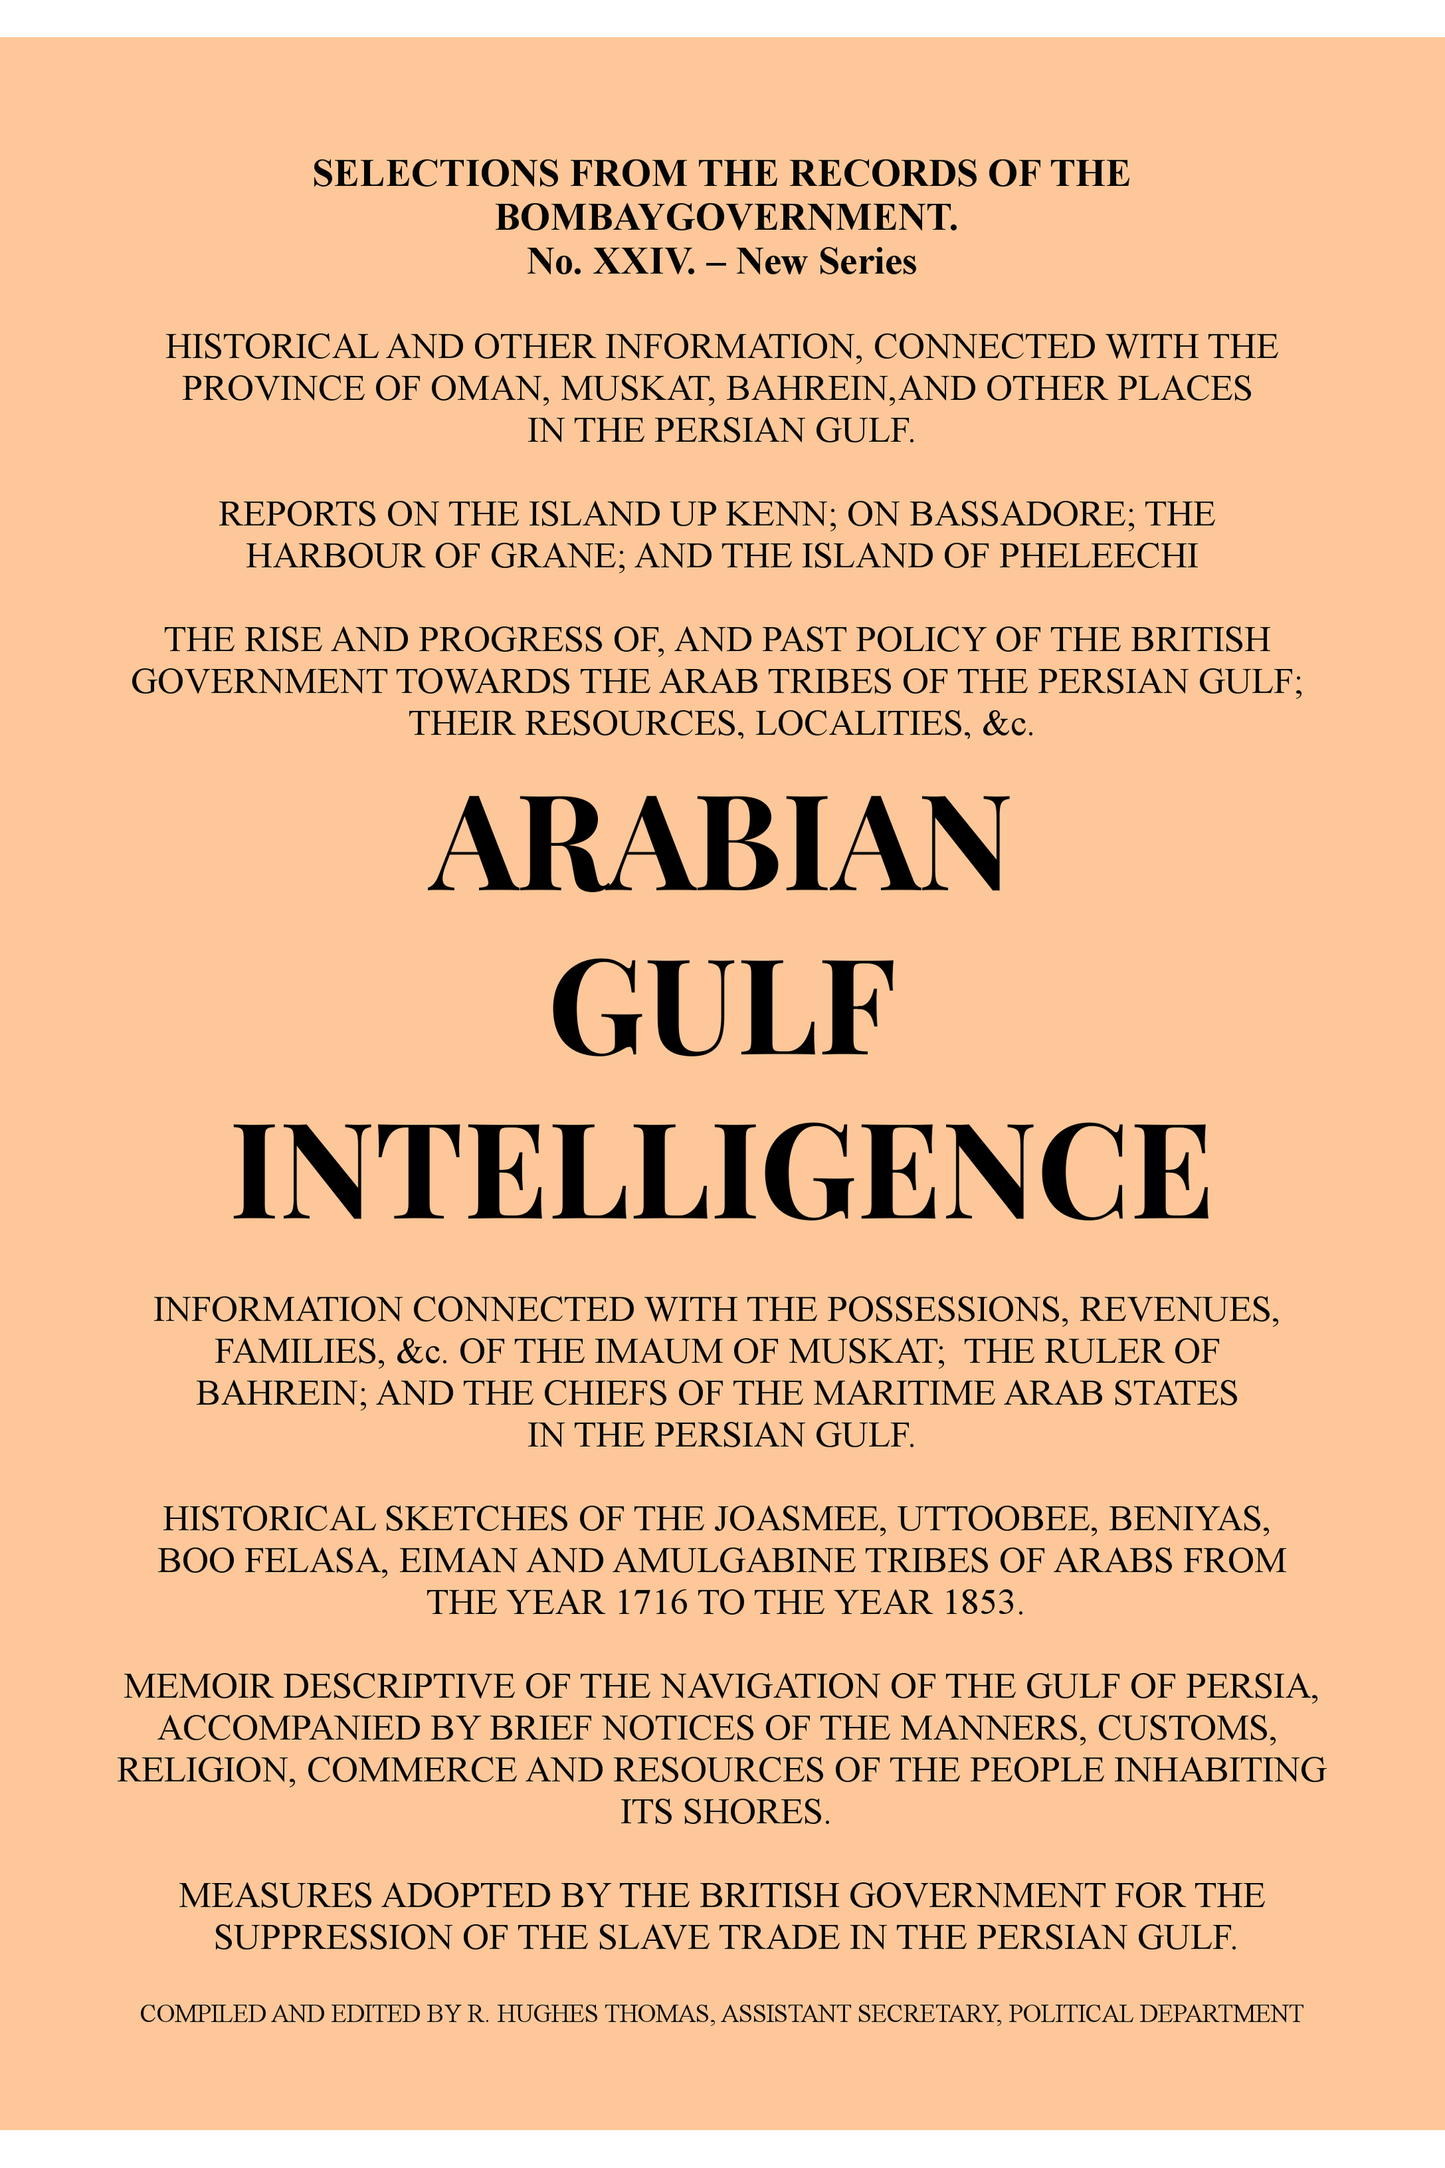 Arabian Gulf Intelligence: Selections from the Records of the Bombay Government, New Series, No.XXIV, 1856